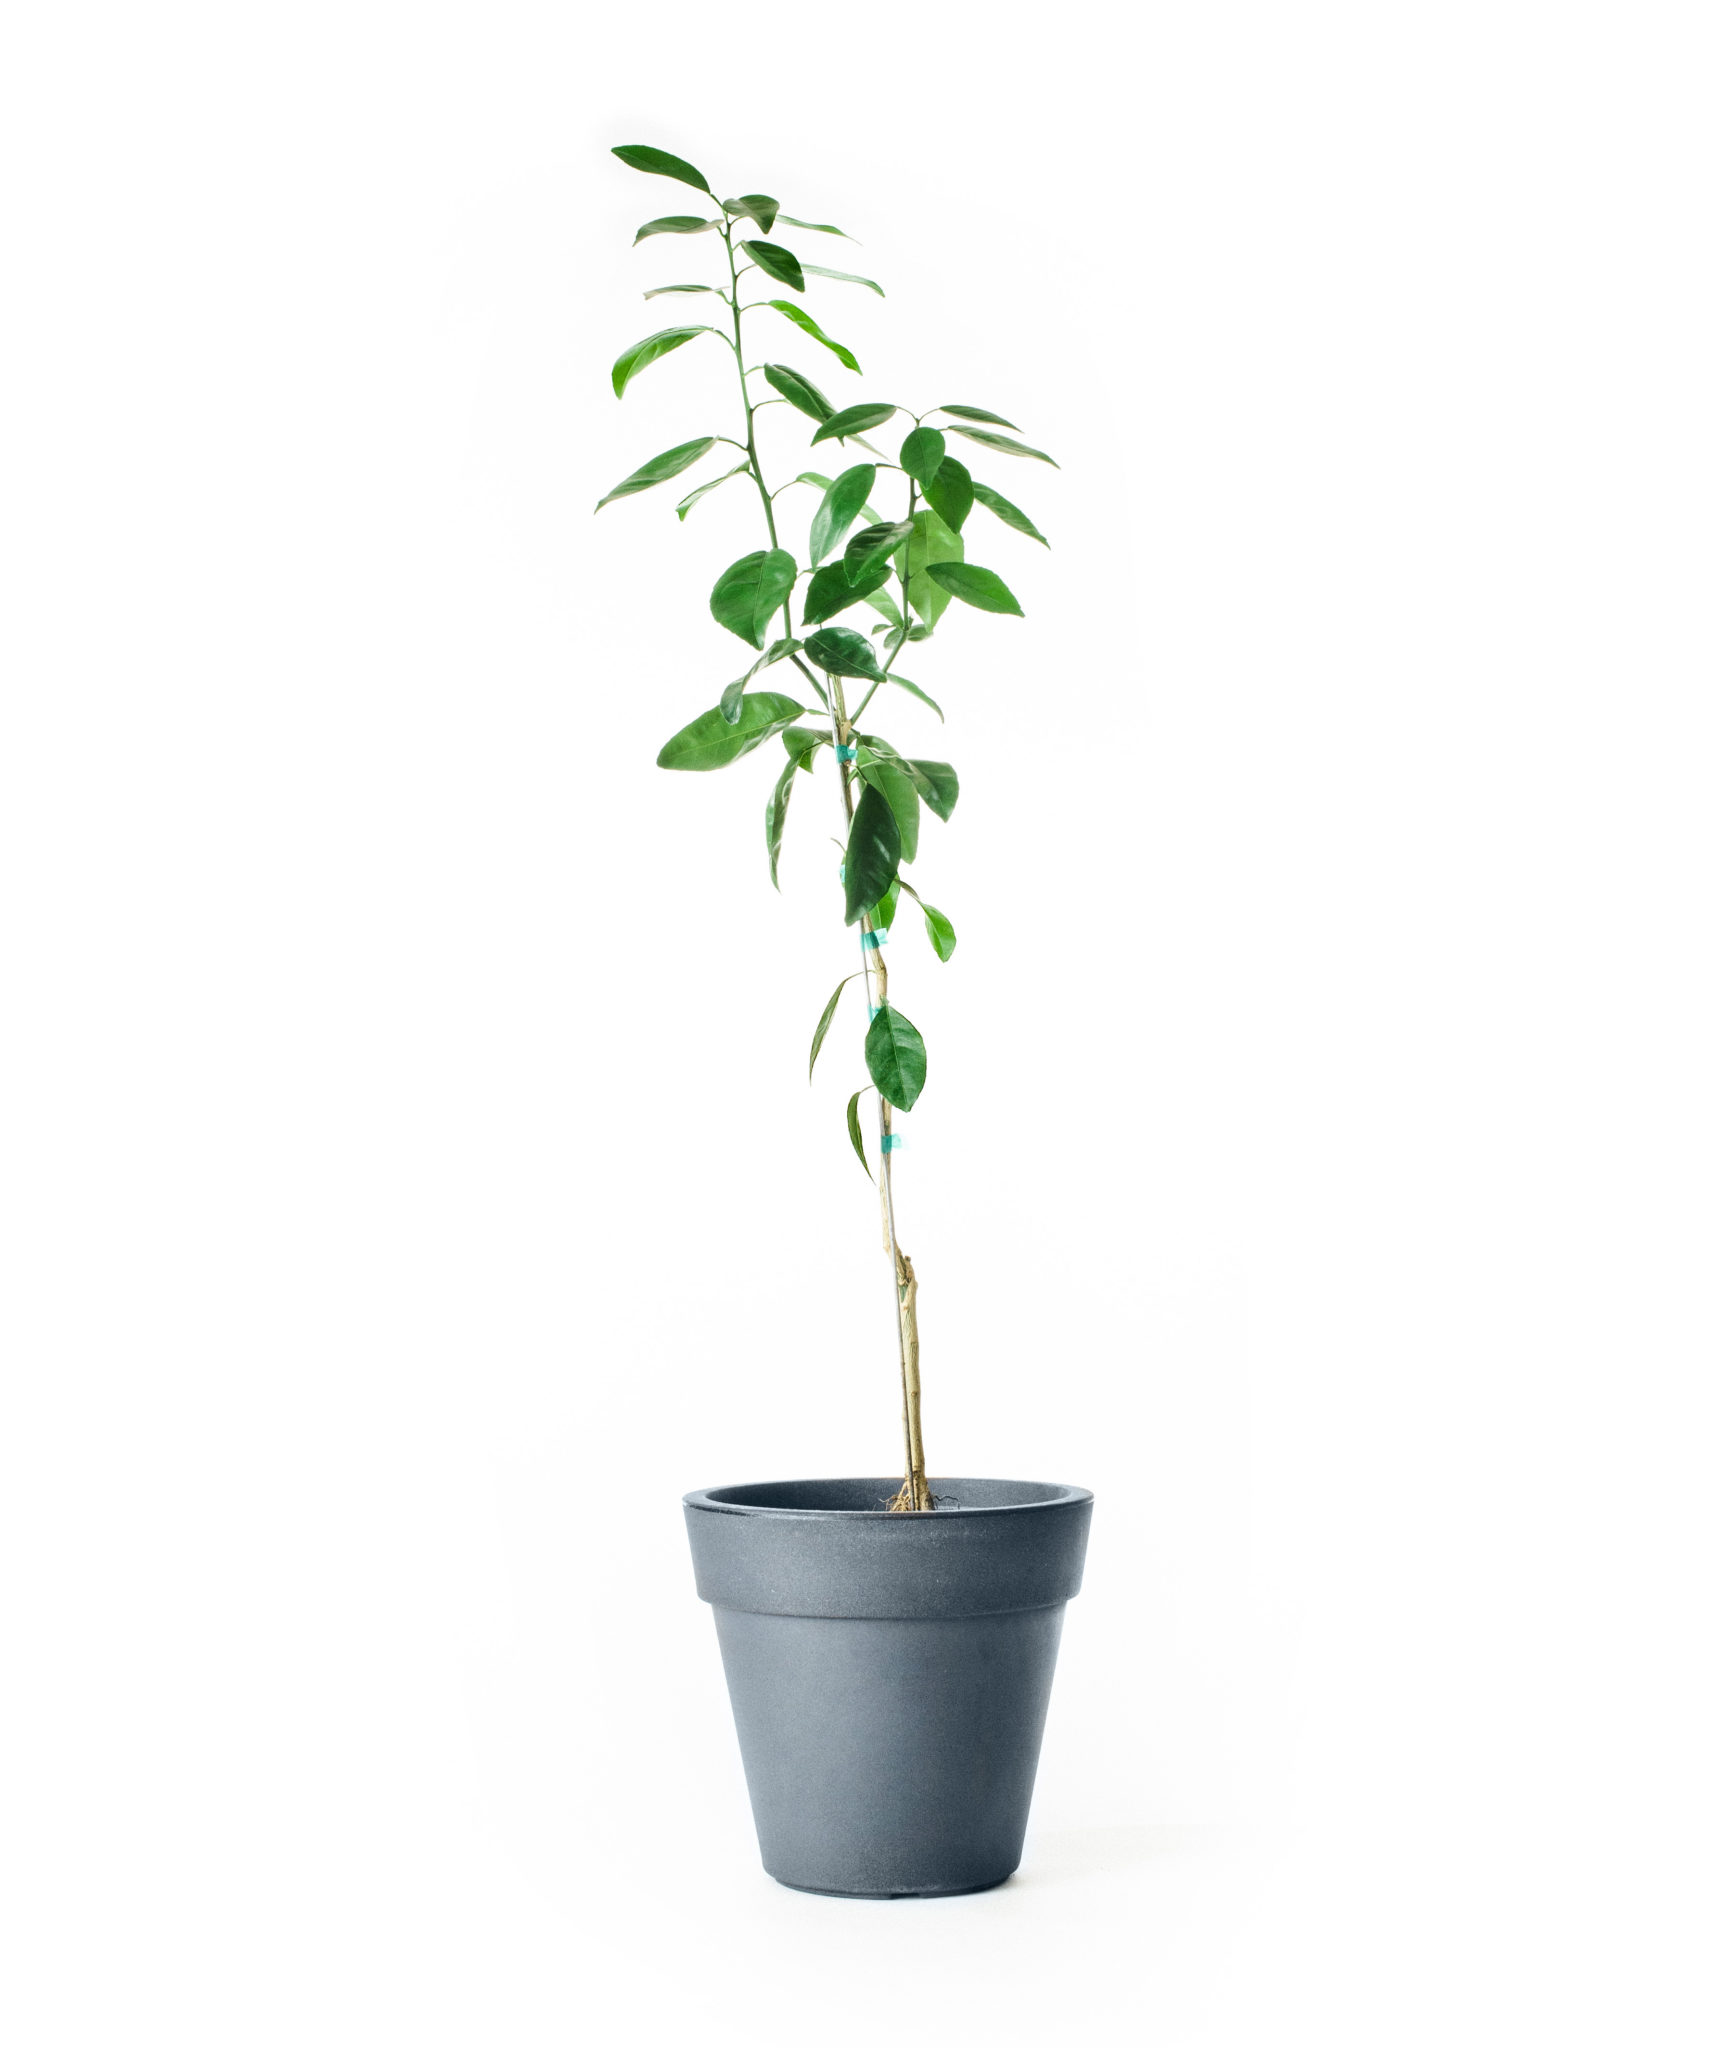 Image of Ponkan Mandarin Tree (Age: 4 - 5 Years Height: 3 - 4 FT Ship Method: Delivery)